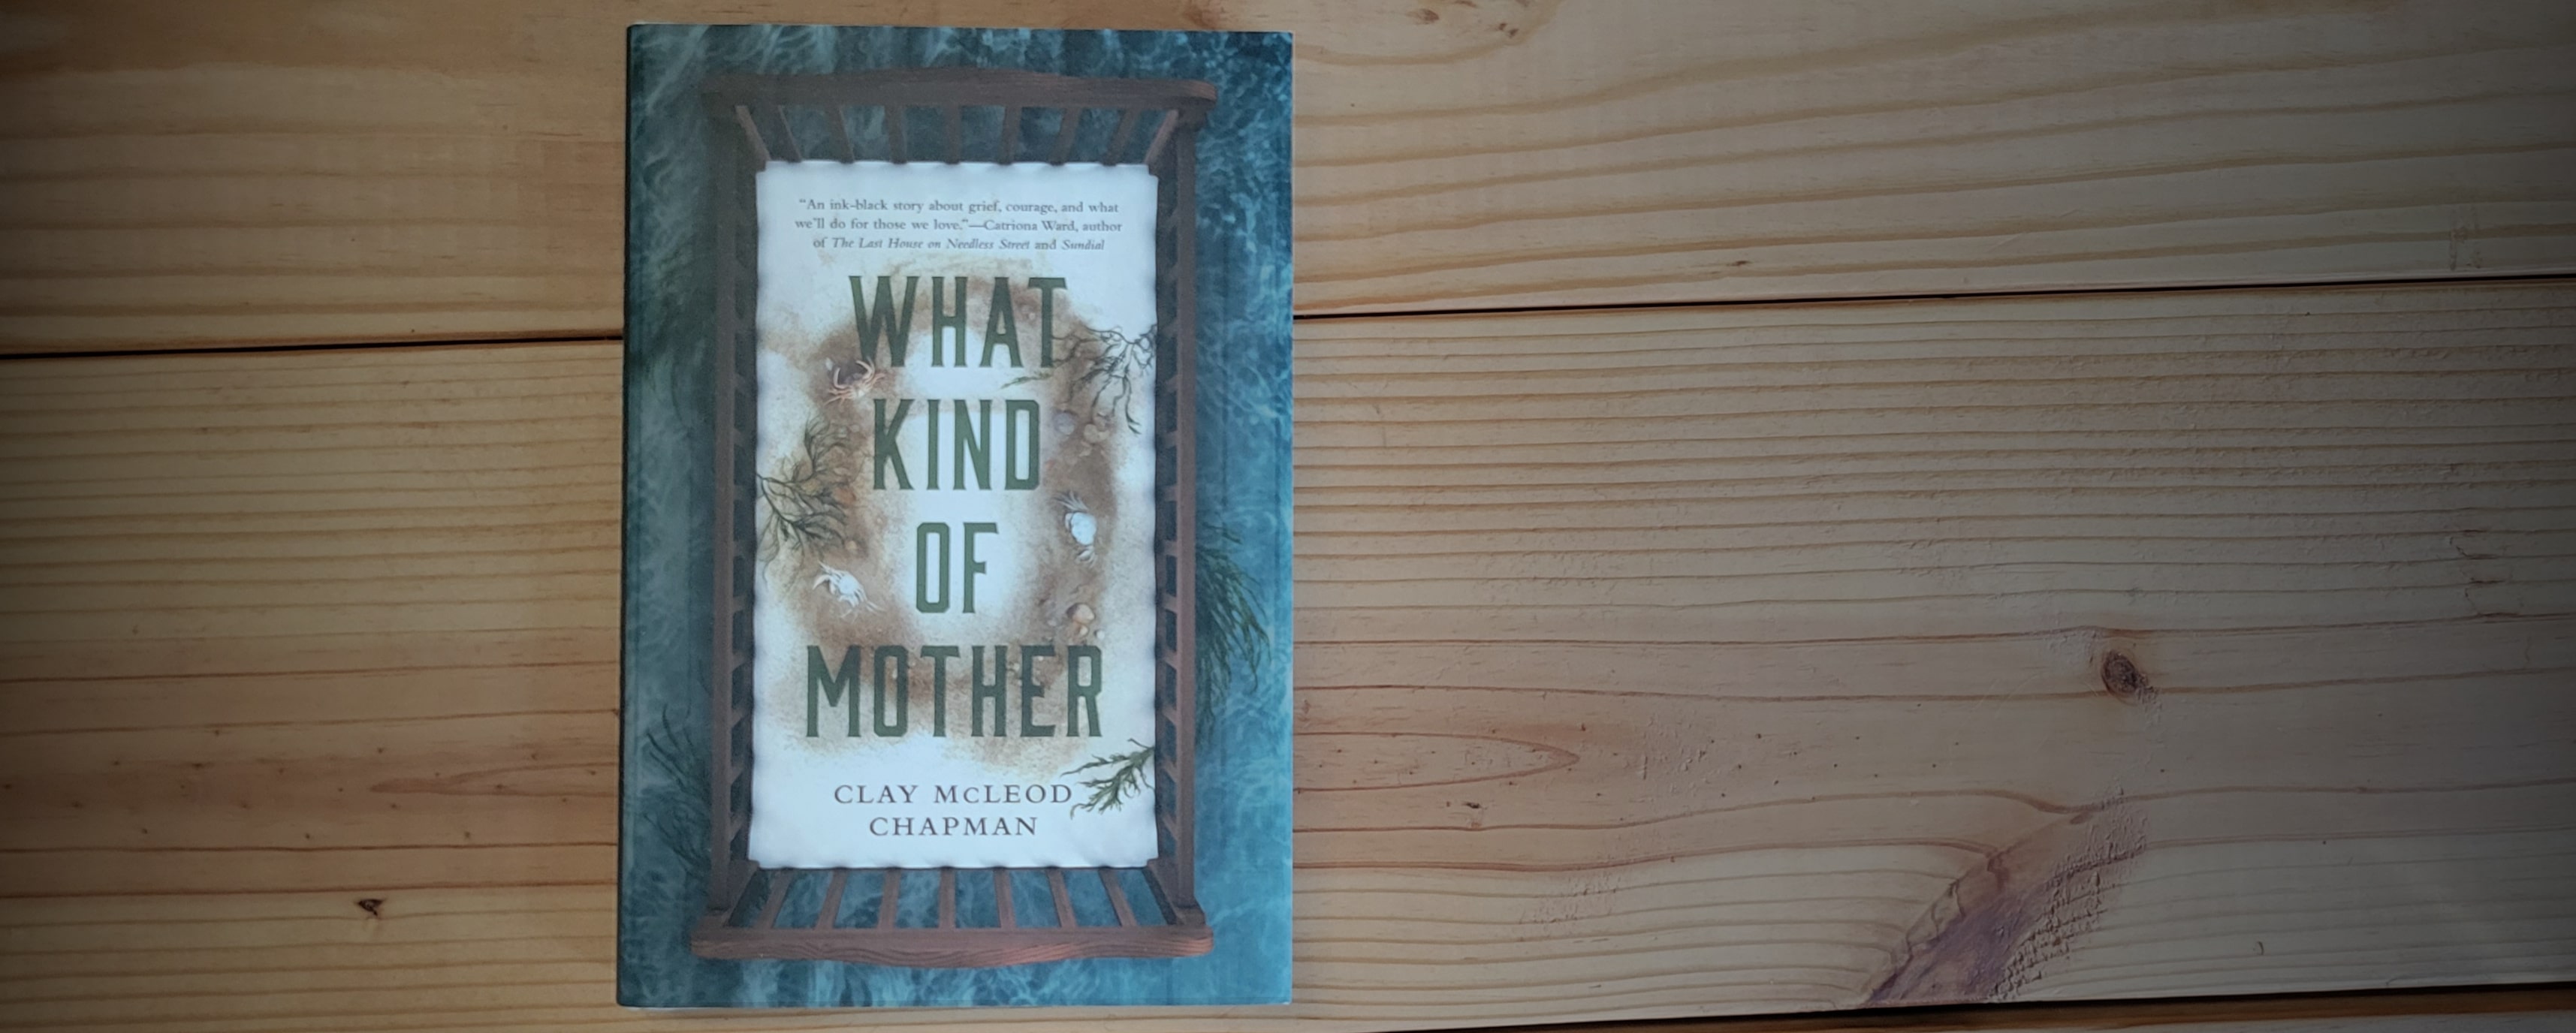 Book Cover of What Kind of Mother by Clay McLeod Chapman